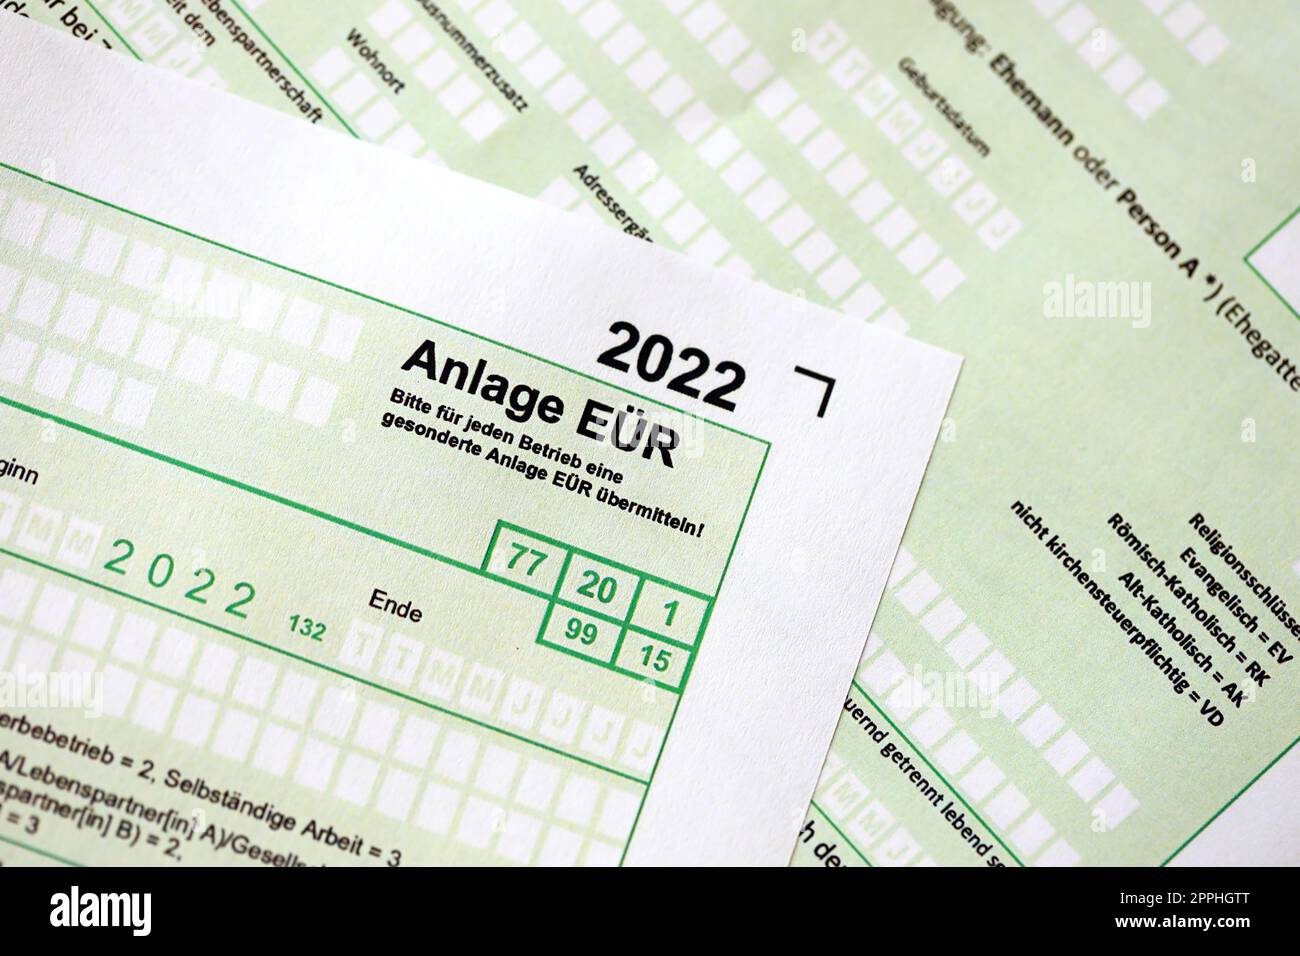 Anlage EUR - German 2022 Profit and Loss Statement and Asset List or Working Capital Statement close up. The concept of taxation and accountant paperwork Germany Stock Photo